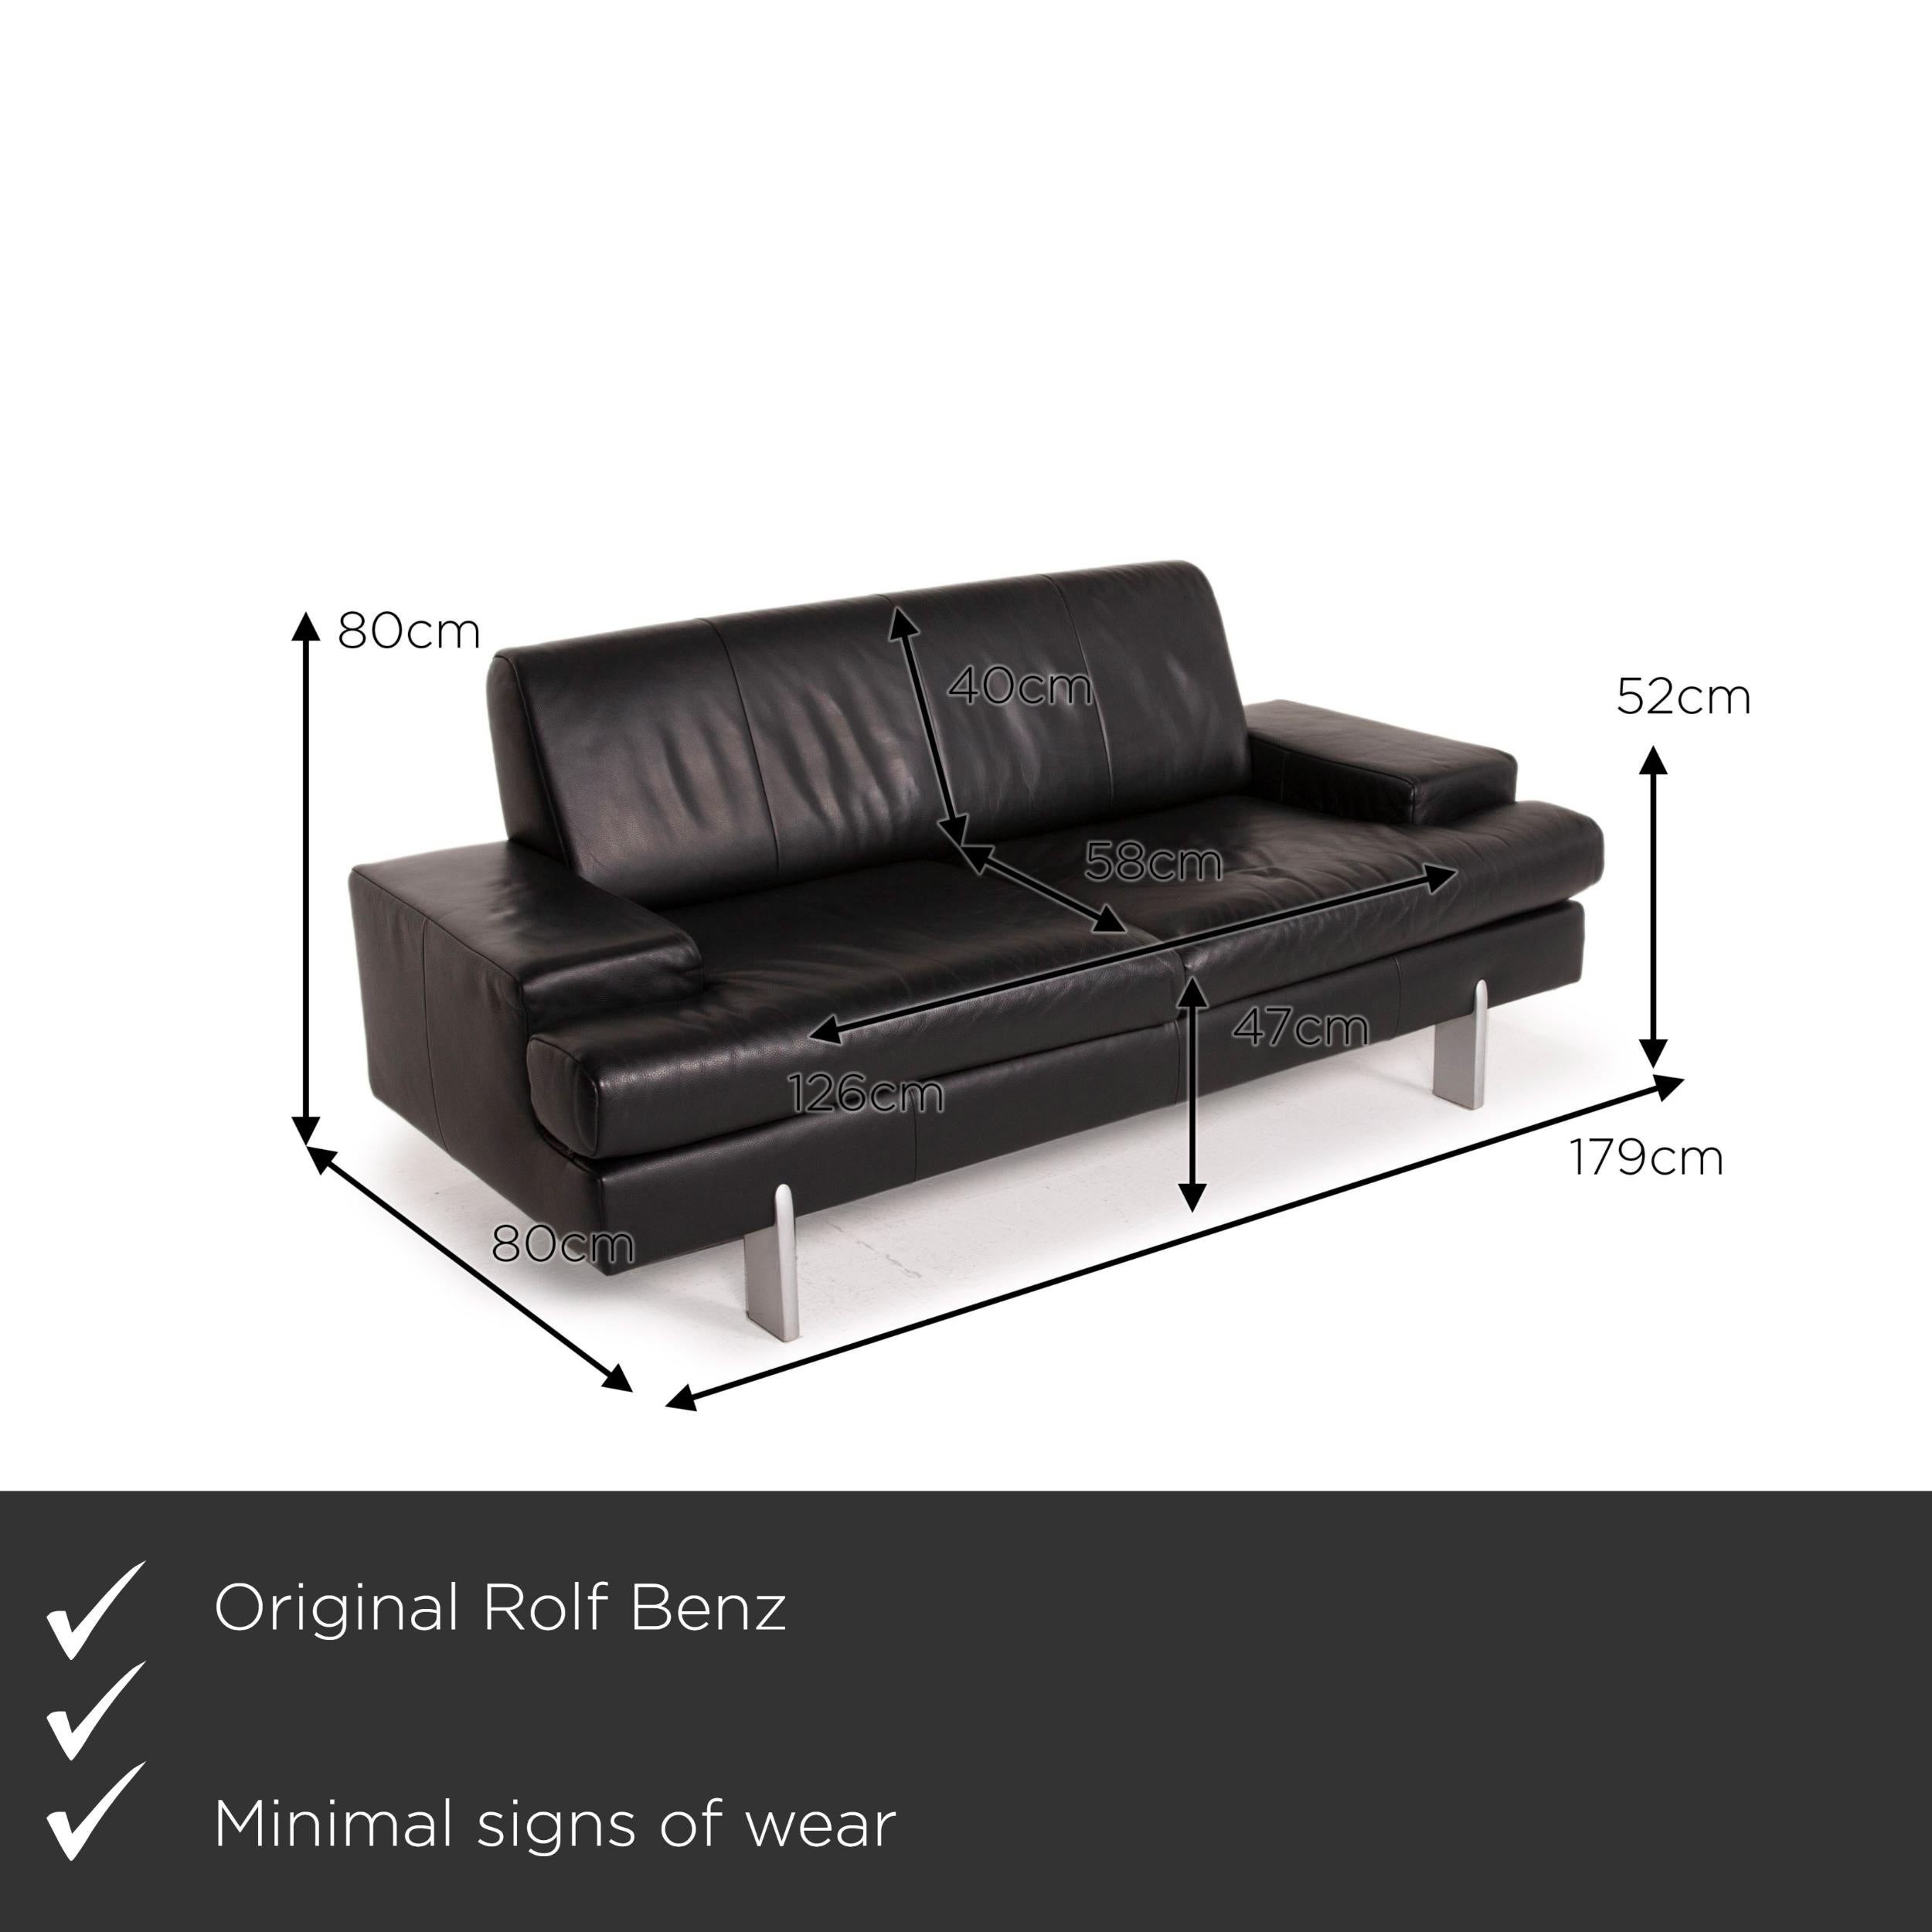 We present to you a Rolf Benz AK 644 leather sofa black two-seater couch.
  
 

 Product measurements in centimeters:
 

 depth: 80
 width: 179
 height: 80
 seat height: 47
 rest height: 52
 seat depth: 58
 seat width: 126
 back